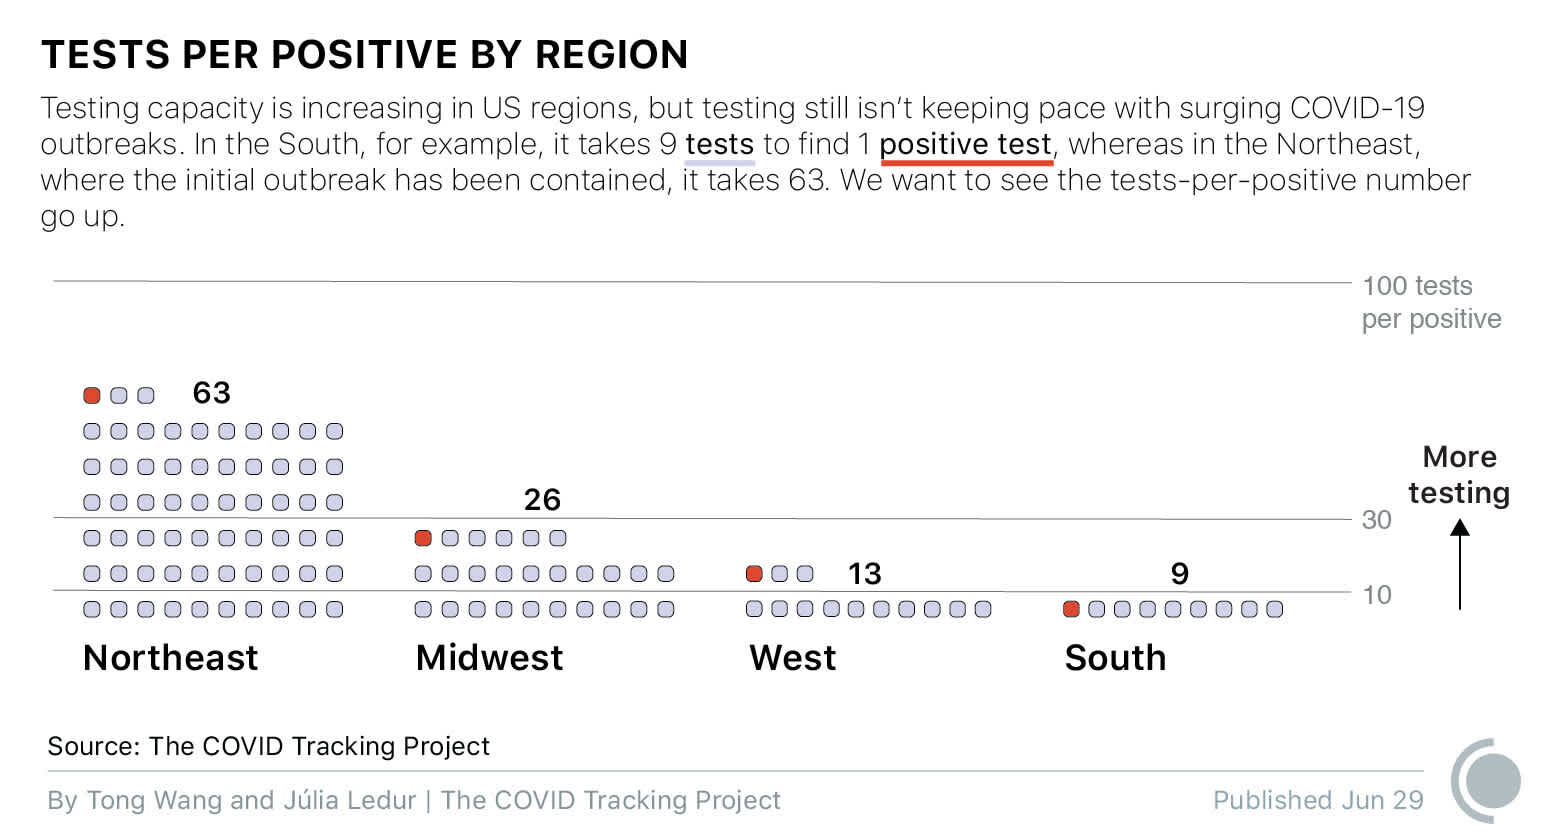 A dot graph showing the current tests per positives for each region of the United States. In the Northeast, it's 63 tests per positive; in the Midwest, it's 26 tests per positive; in the West, it's 13 tests per positive; in the South, it's only 9 tests per positive.